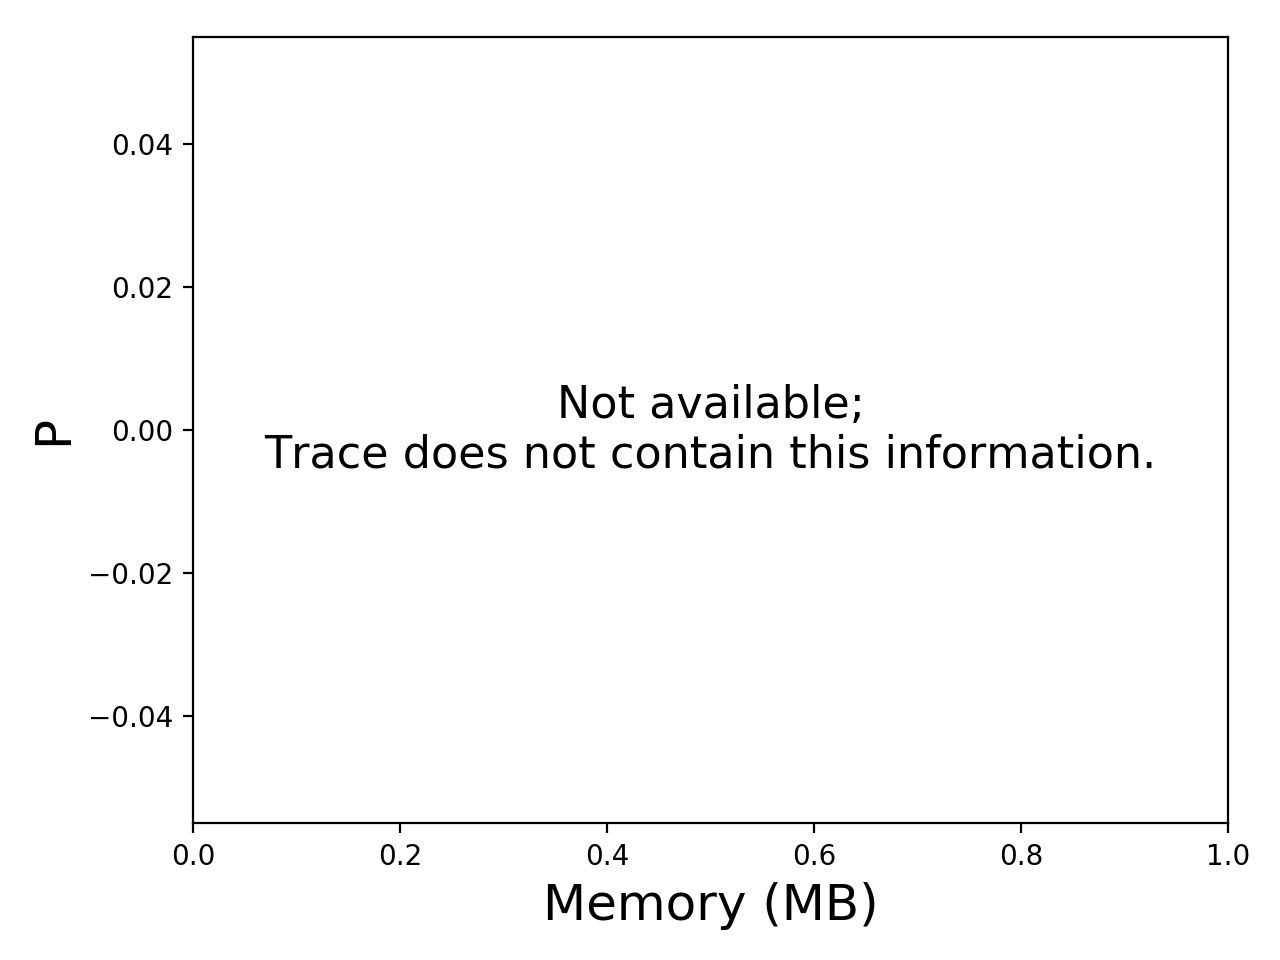 Task memory consumption graph for the Pegasus_P5 trace.